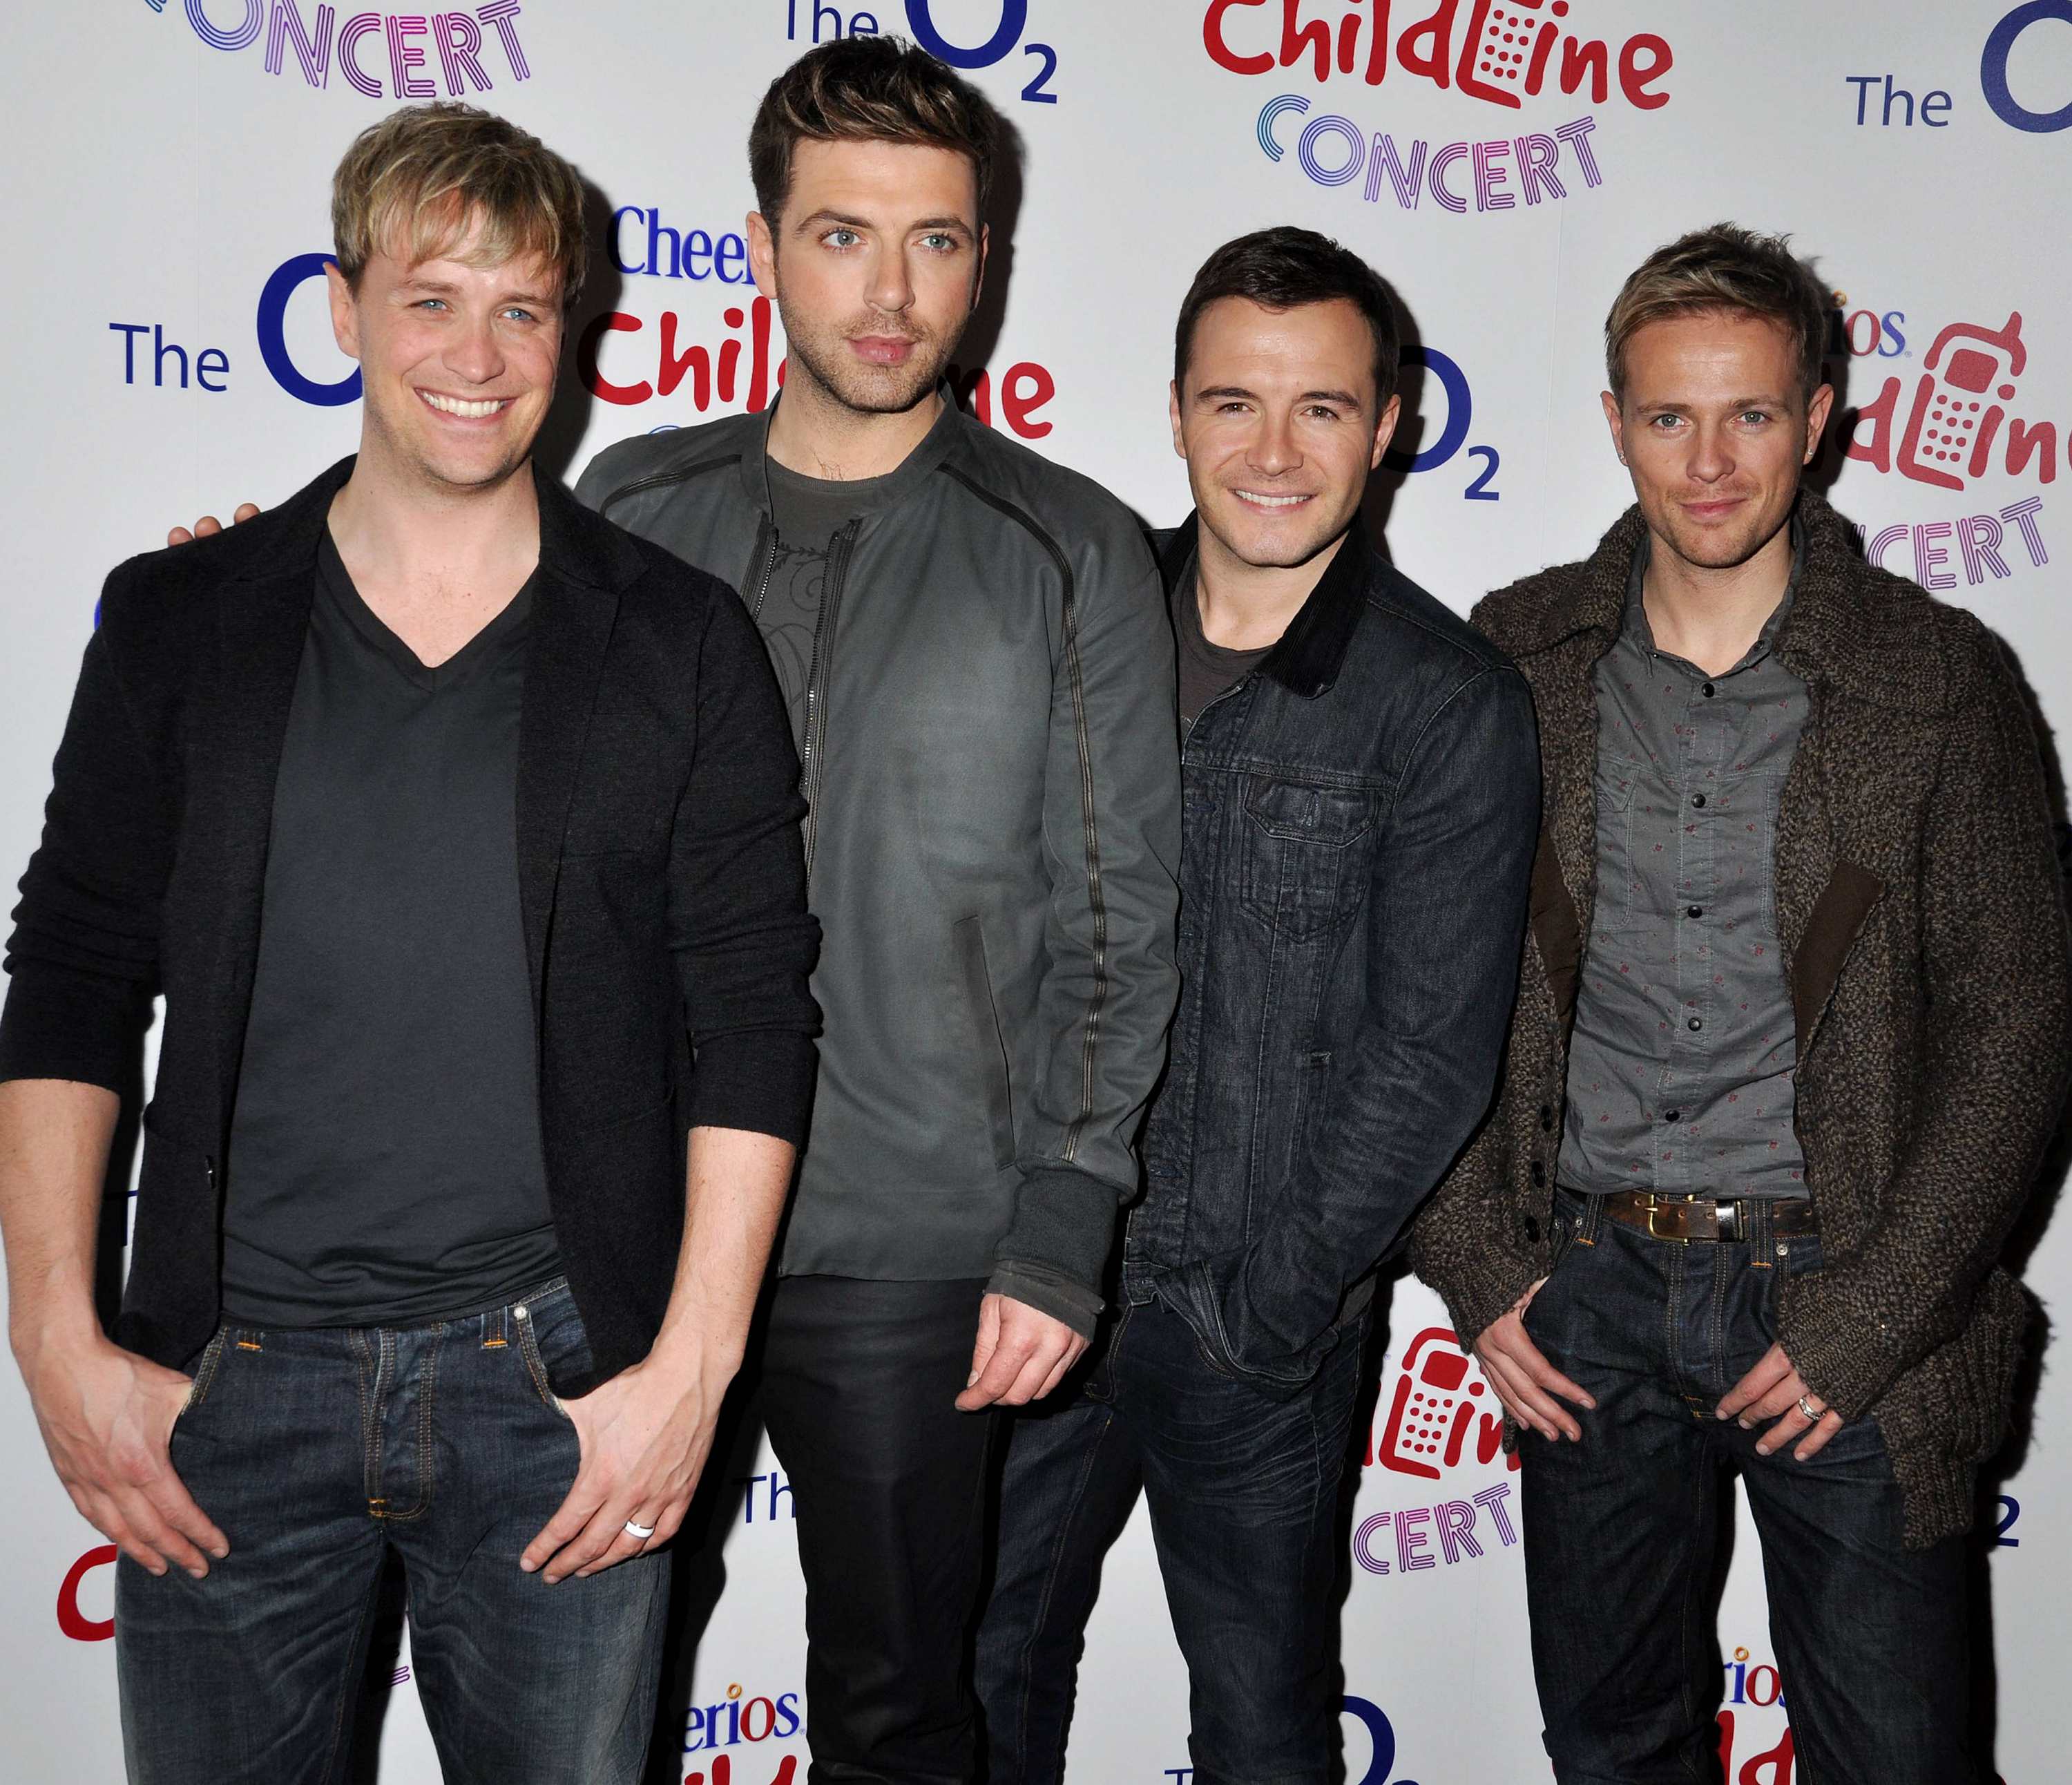 Childline Acts arrive at The O2 Arena, Dublin